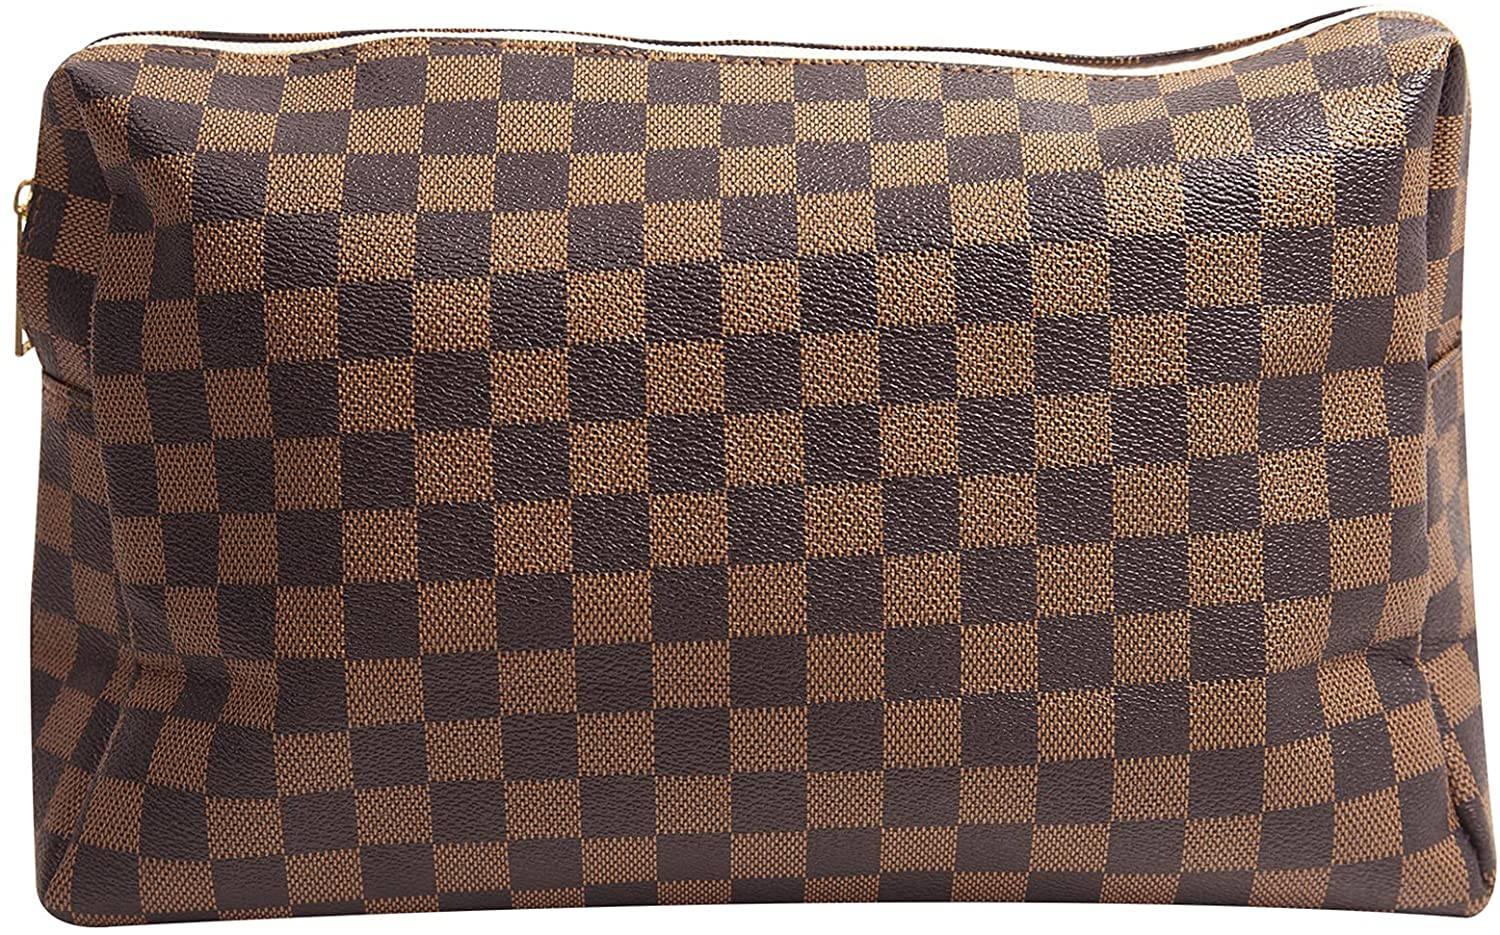 Travel Makeup Bag for Women Checkered Cosmetic Pouch Vegan Leather